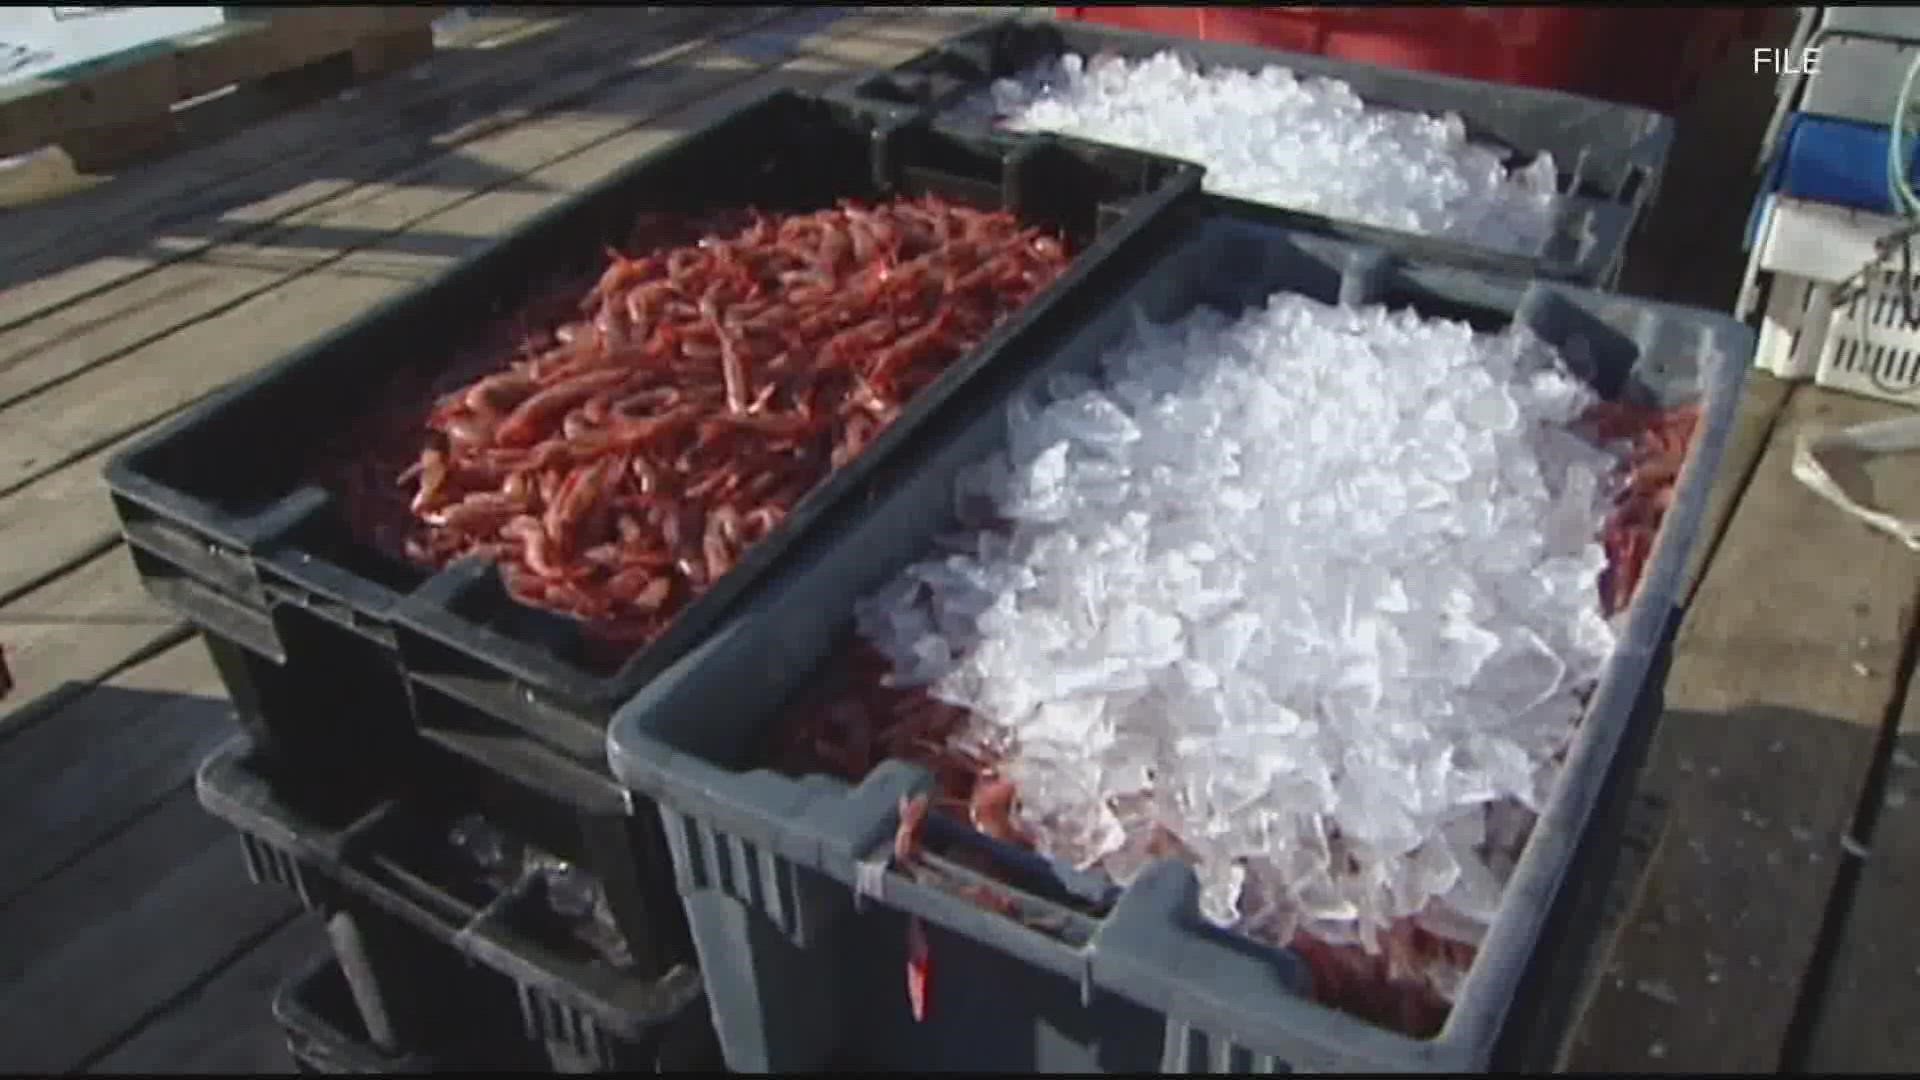 The shrimp fishing industry was mostly based in Maine, and it's been shut down since 2013 due to a collapse in the shrimp population, which has struggled to recover.